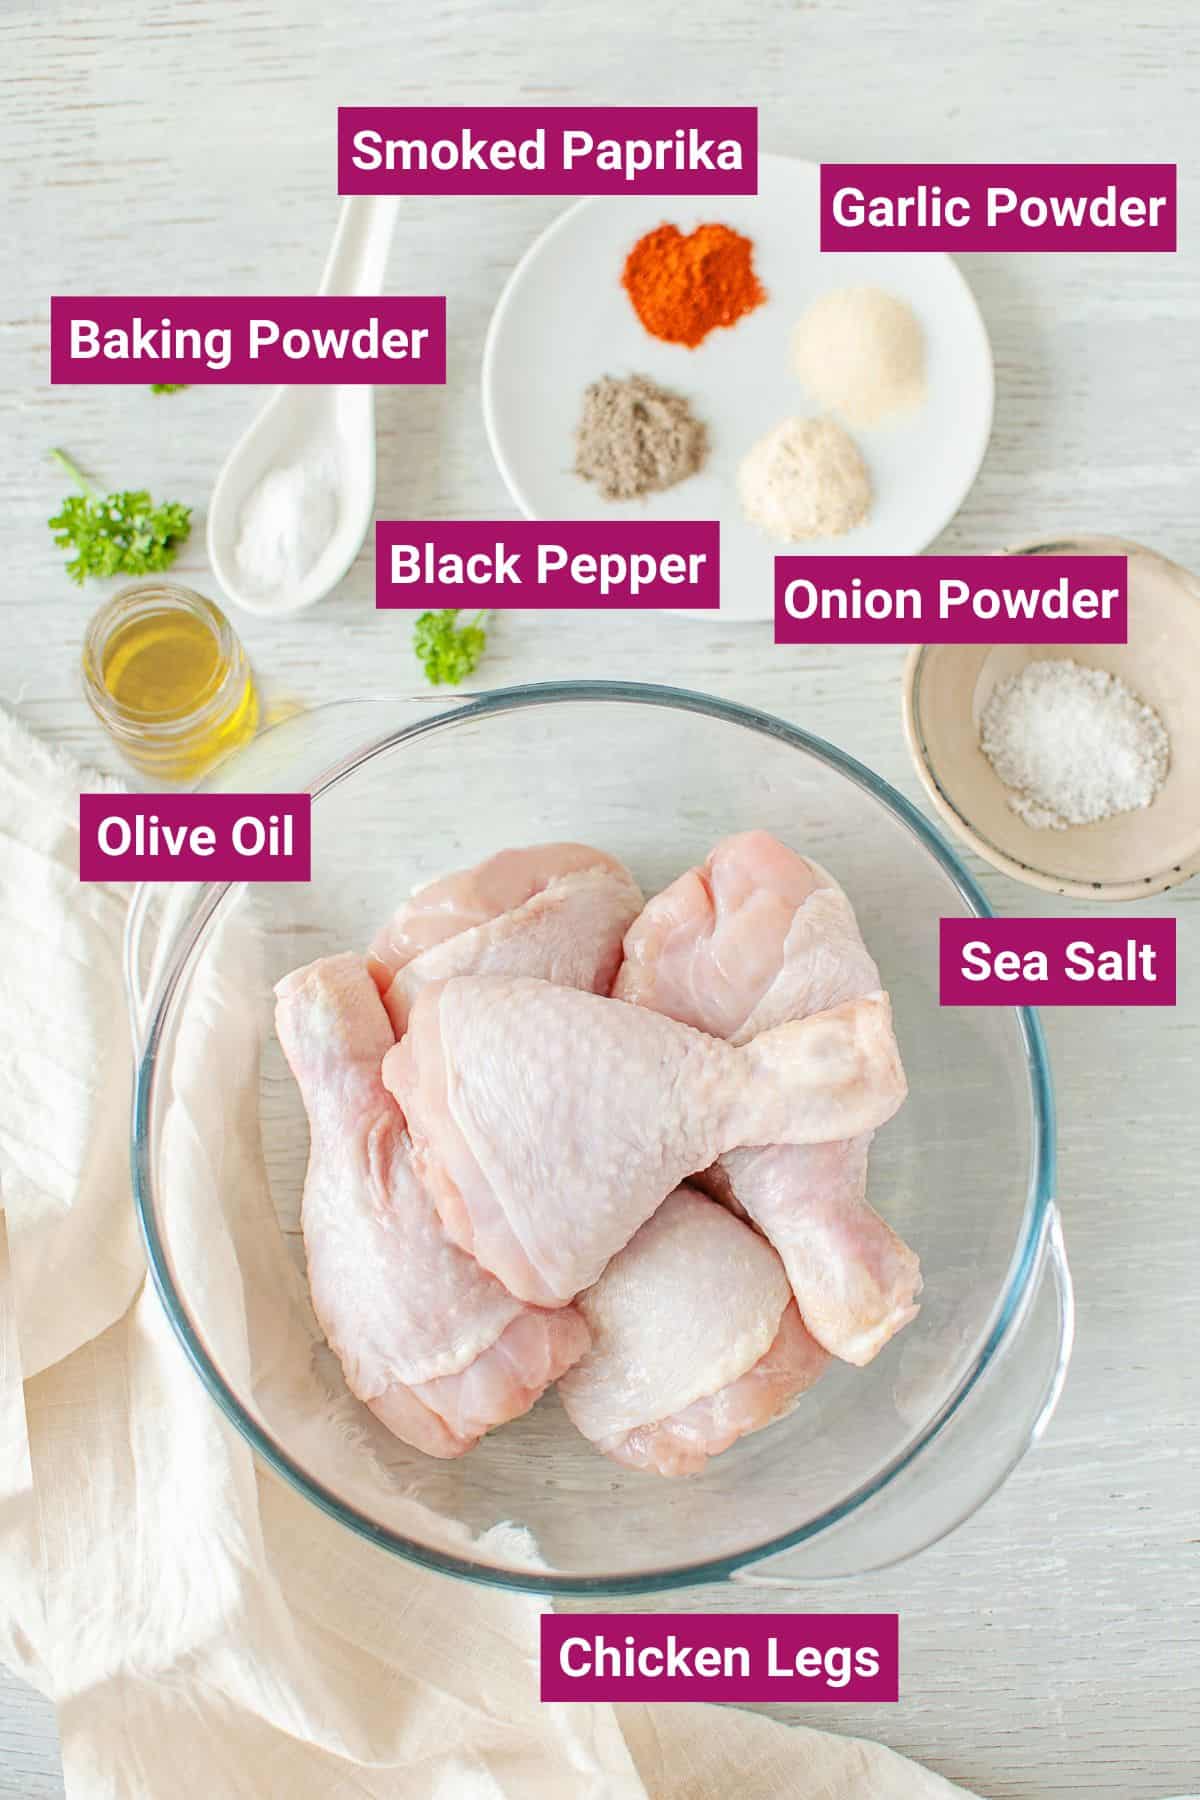 Overhead view of the labeled ingredients for air fryer chicken: a bowl of raw chicken legs, a bowl of sea salt, a plate with onion powder, black pepper, garlic powder, and smoked paprika, a spoon with baking powder, and a jar with olive oil